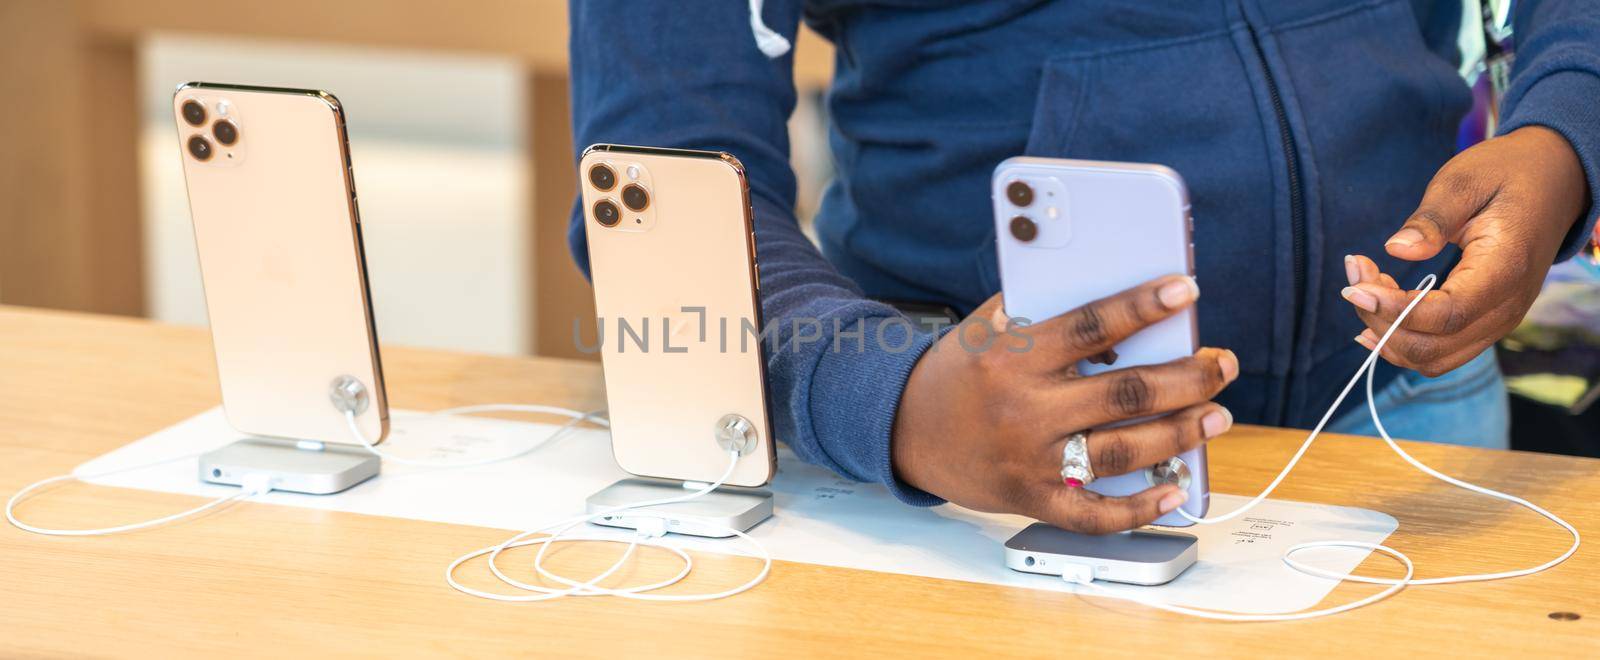 Aventura, Florida, USA - September 20, 2019: The iPhone 11, 11 Pro and Pro Max are displayed as the new smartphone by Apple goes on sale by Mariakray